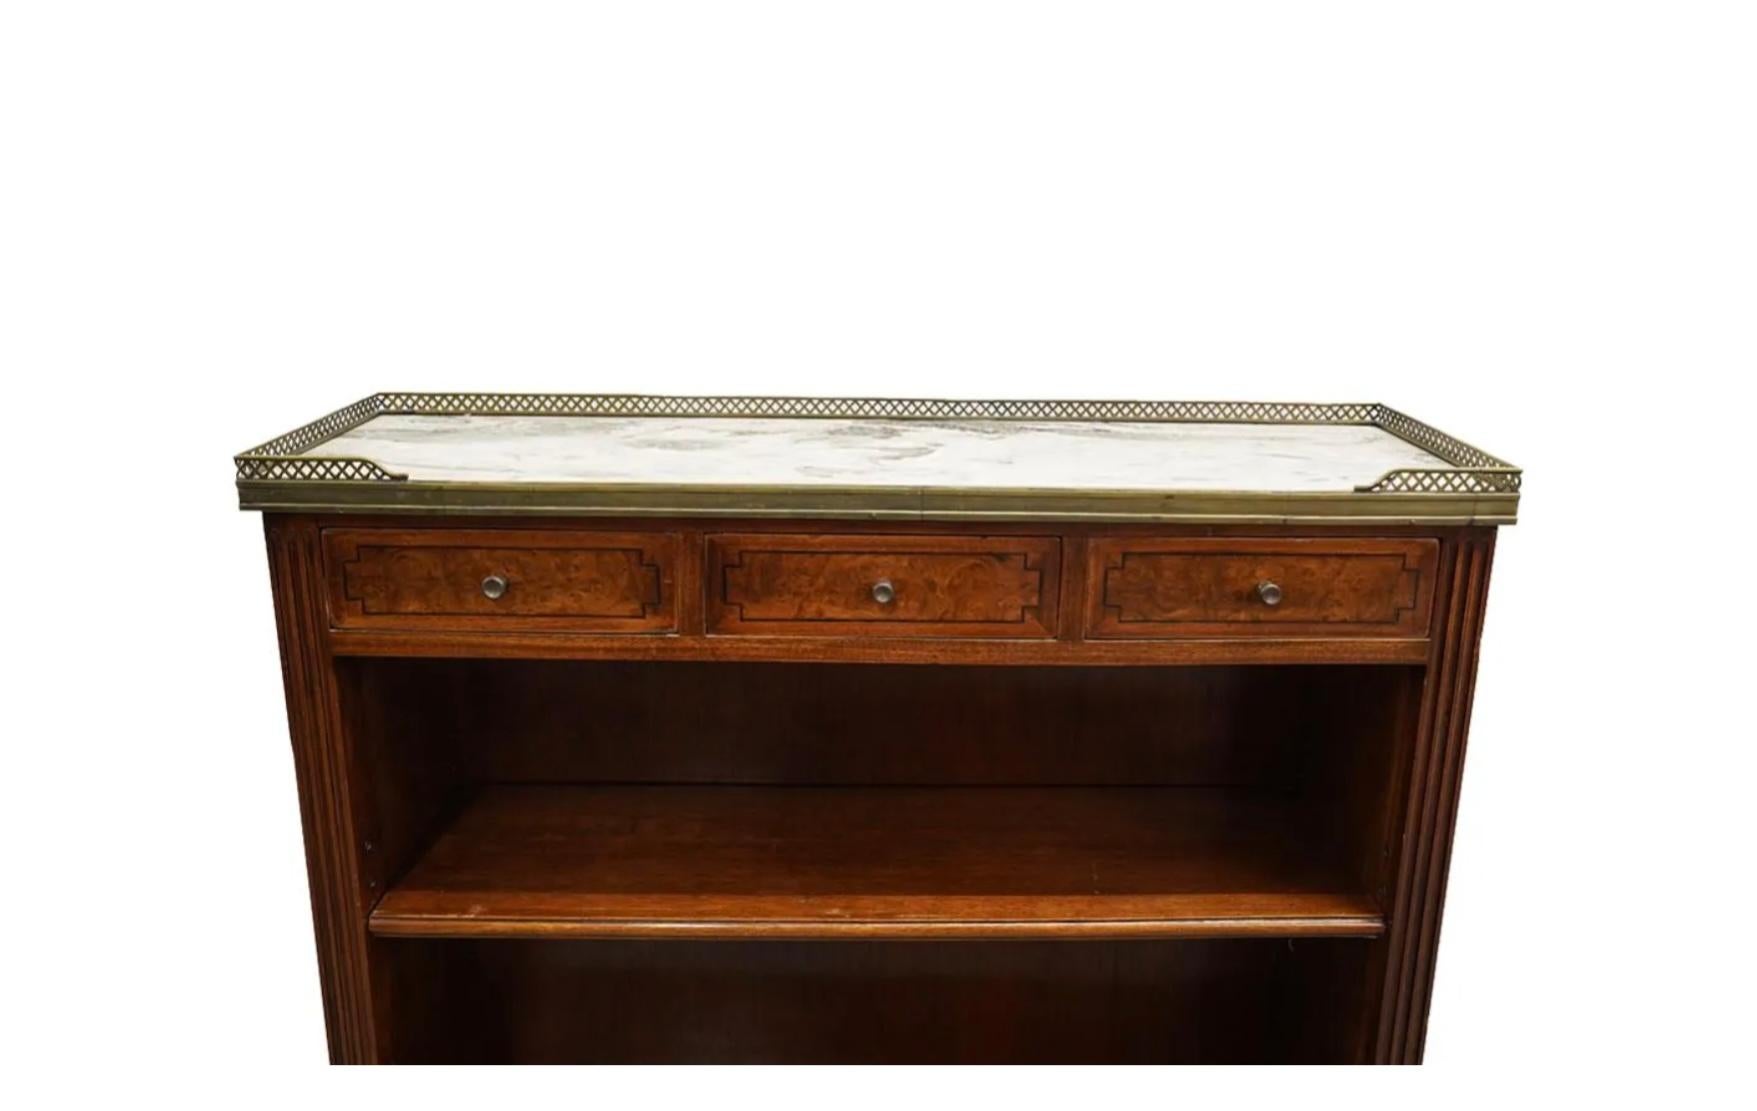 Neoclassical Maison Jansen Marble And Brass Topped Shelving, Early 20th Century For Sale